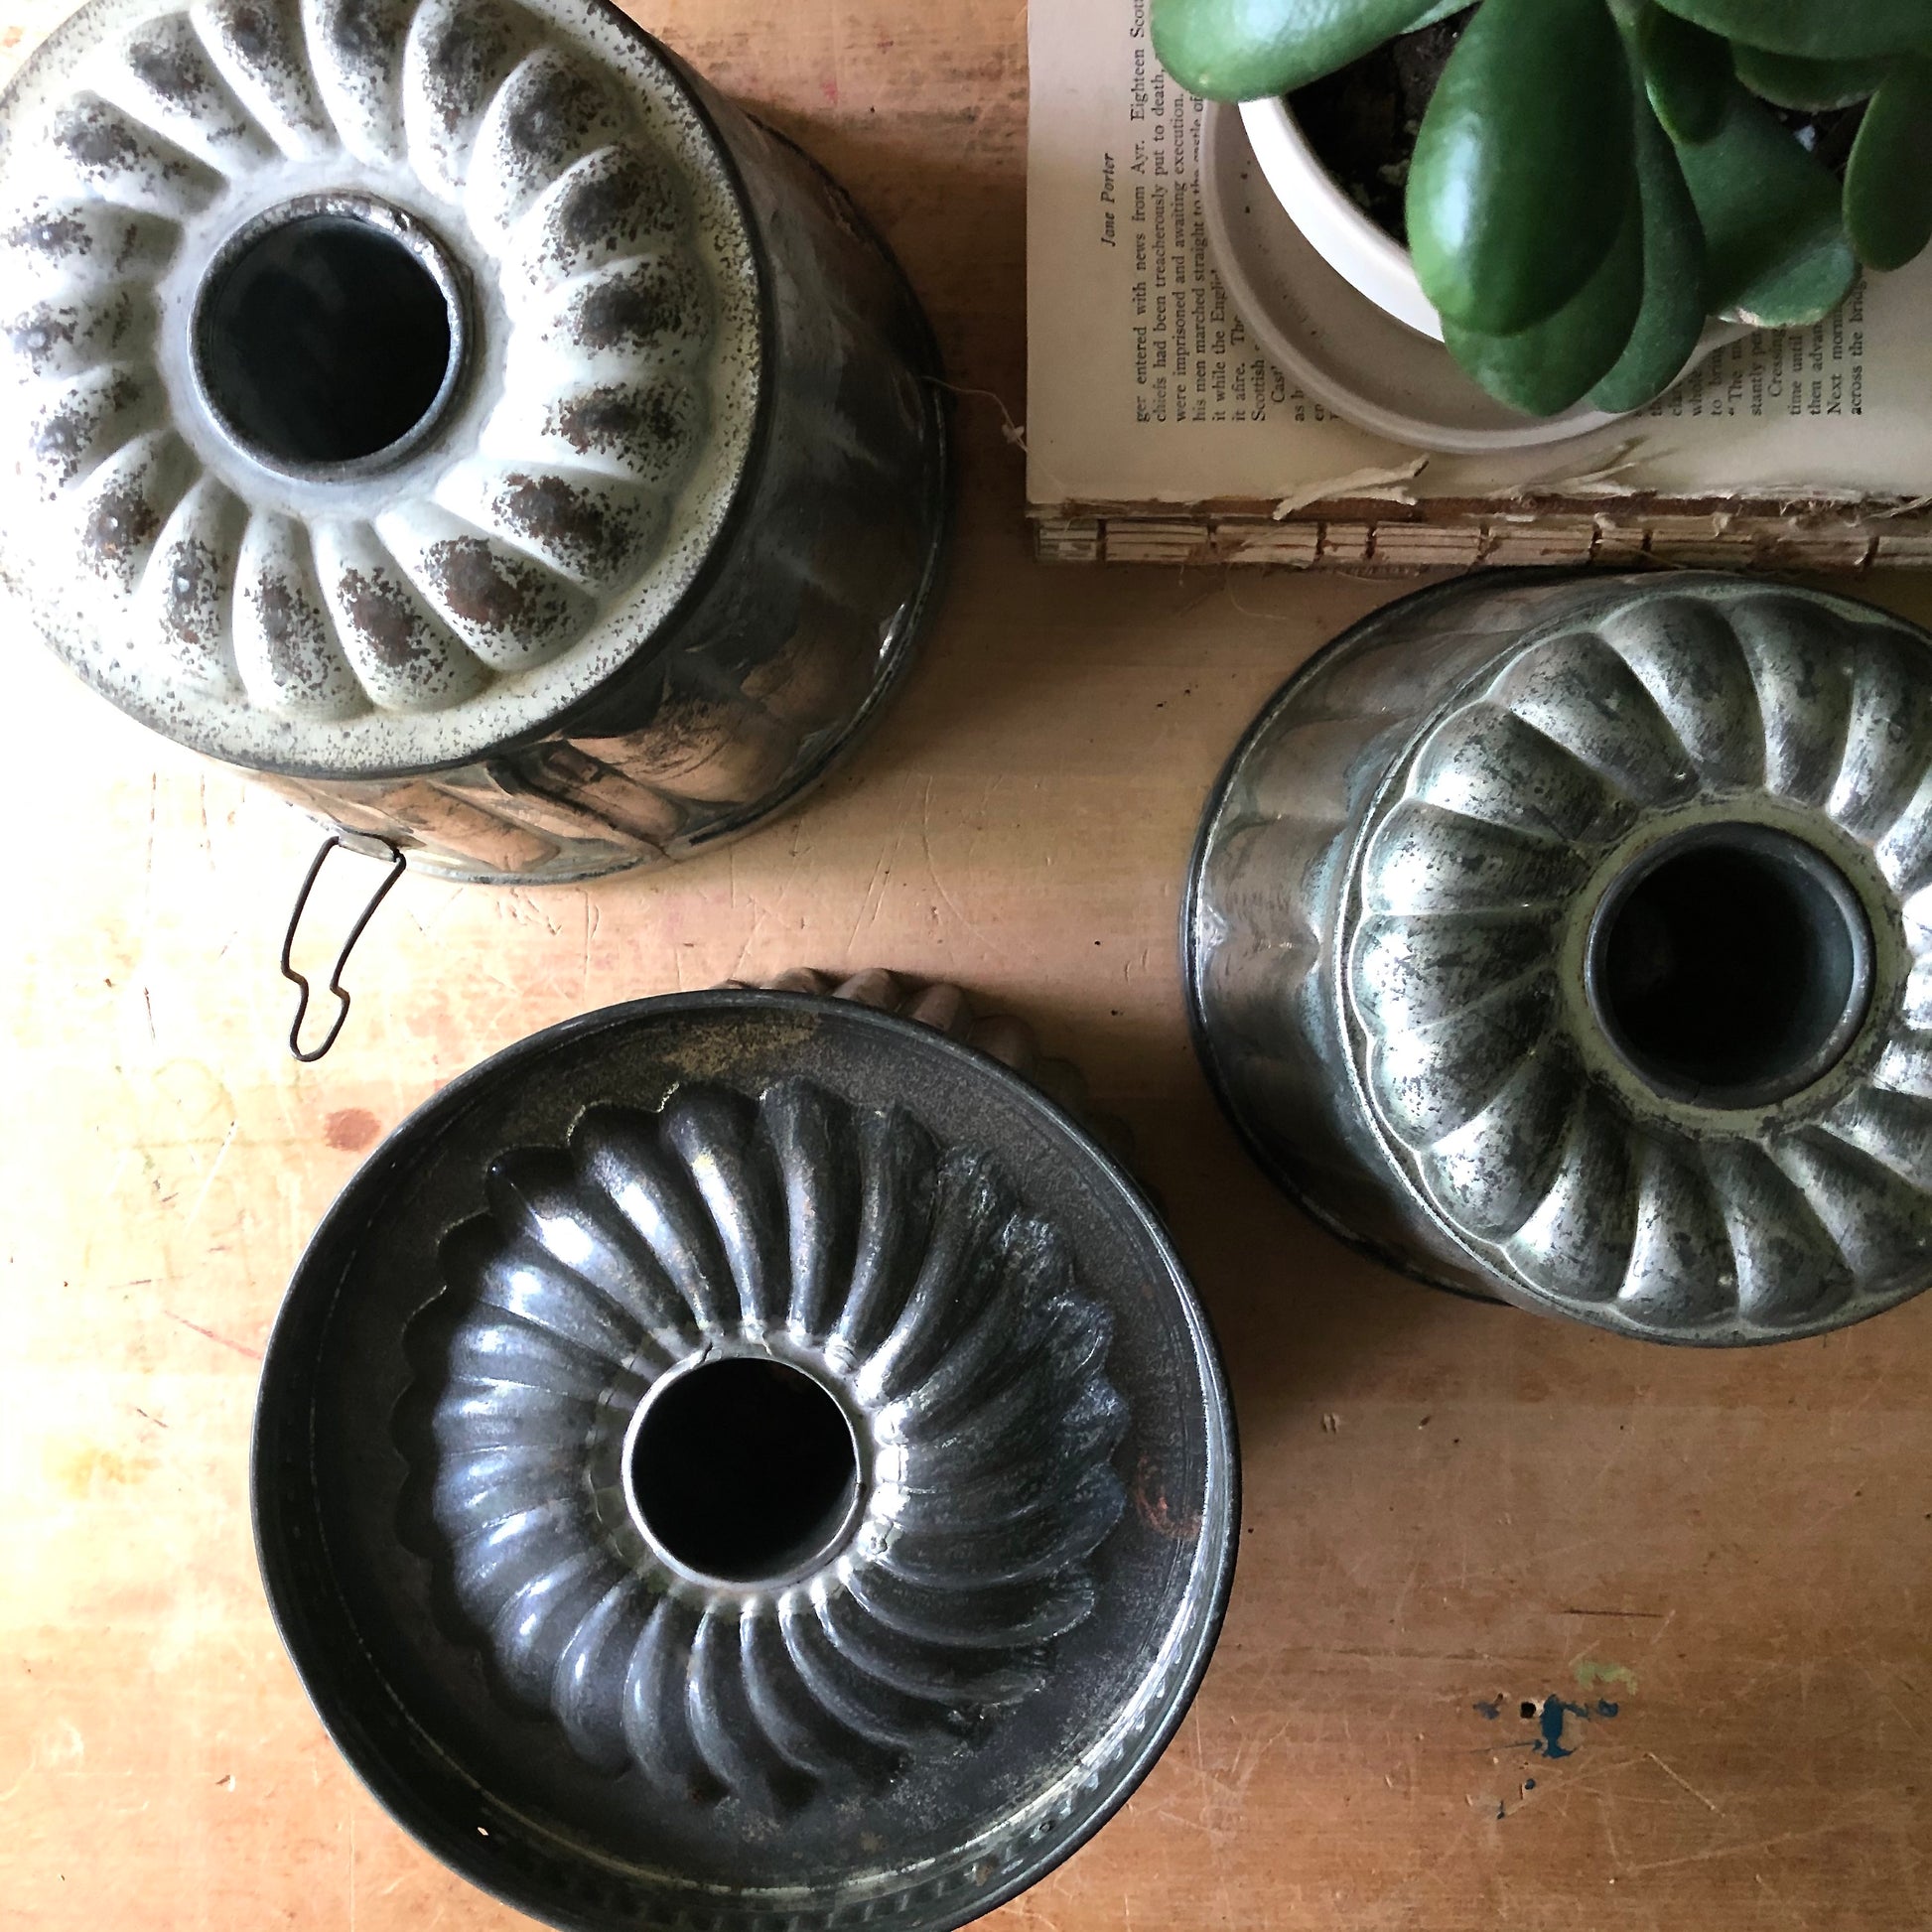 Vintage Tinware Pudding Molds (c.1920s +)